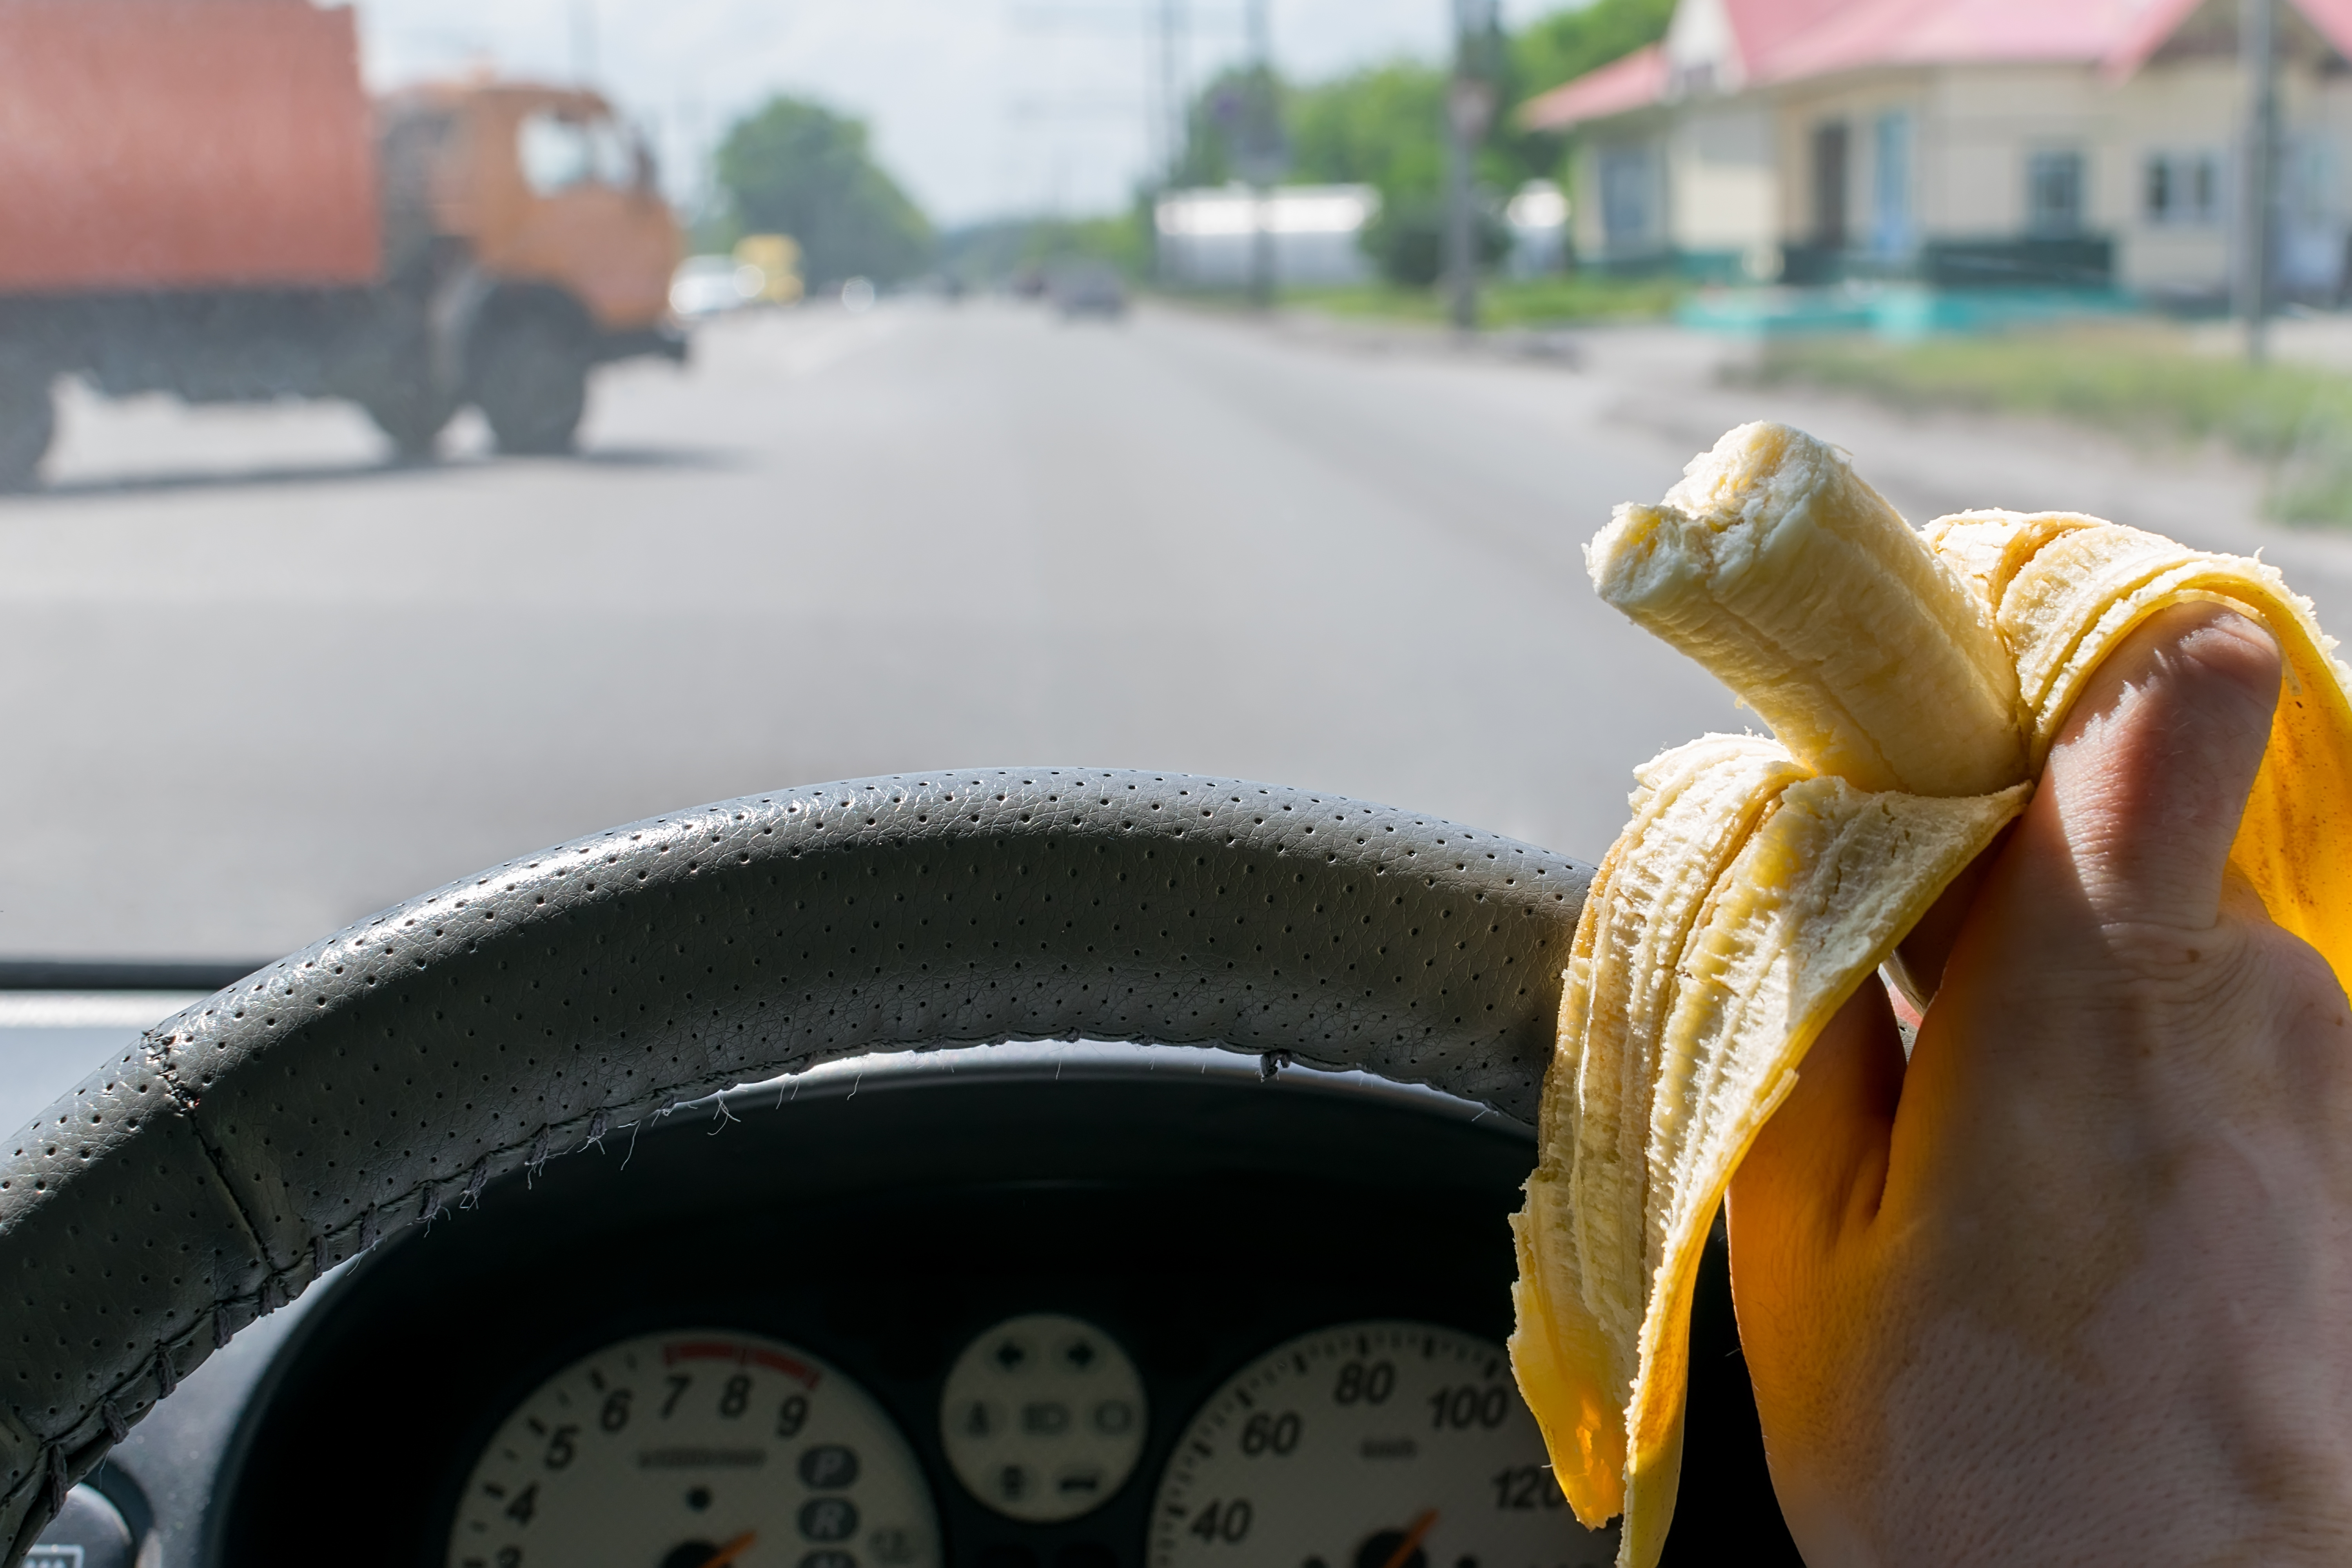 Carolee’s 5 Tips to Healthy Eating for Truck Drivers